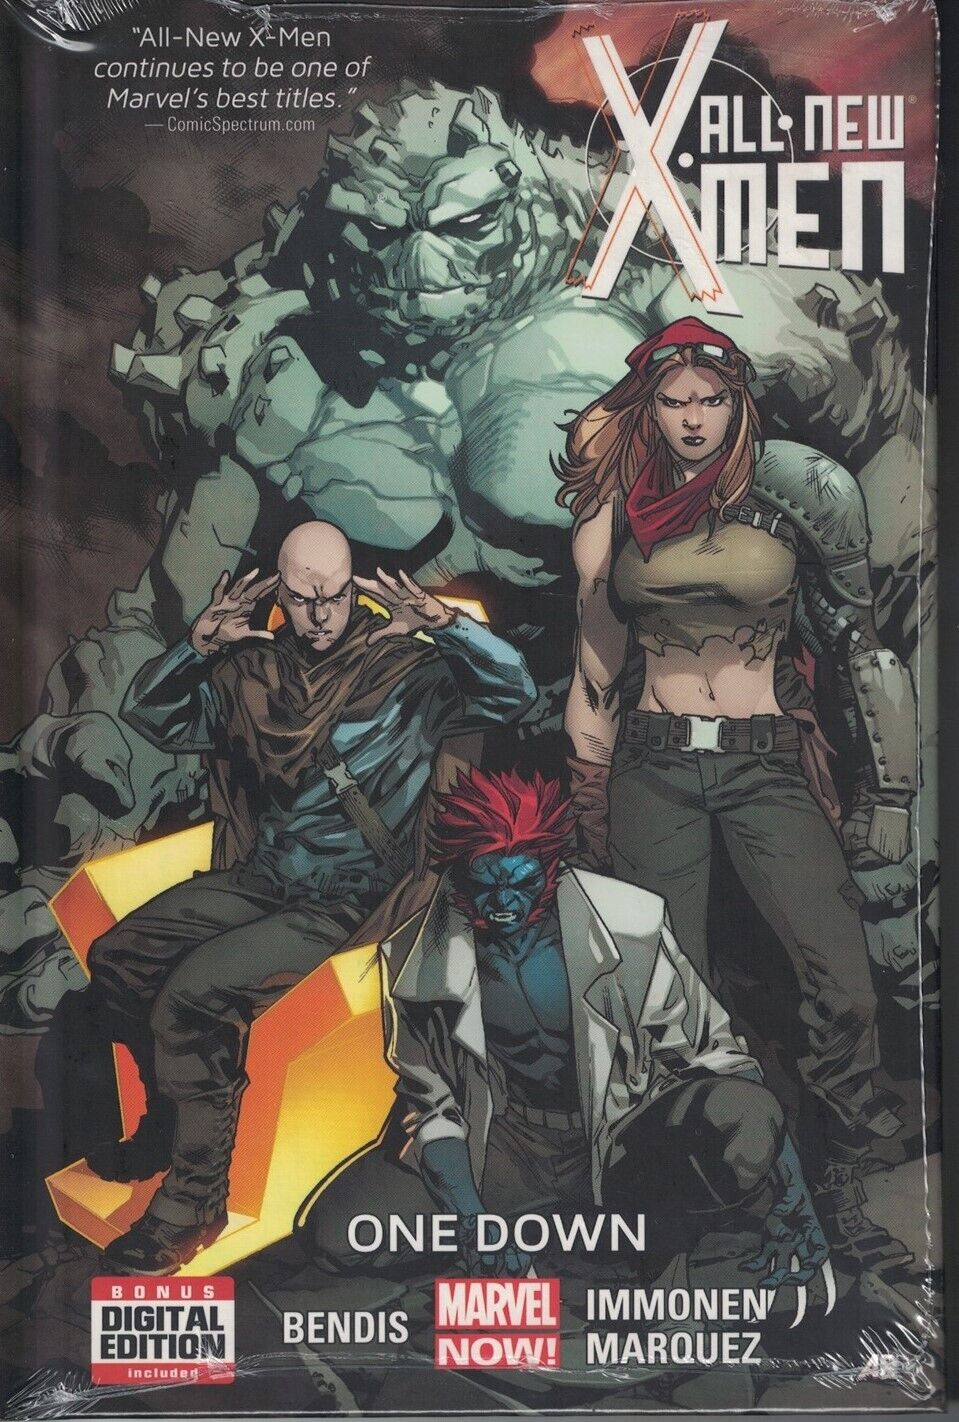 ALL-NEW X-MEN (2012) Vol 5 One Down HC Hardcover $24.99srp Brian Bendis NEW NM